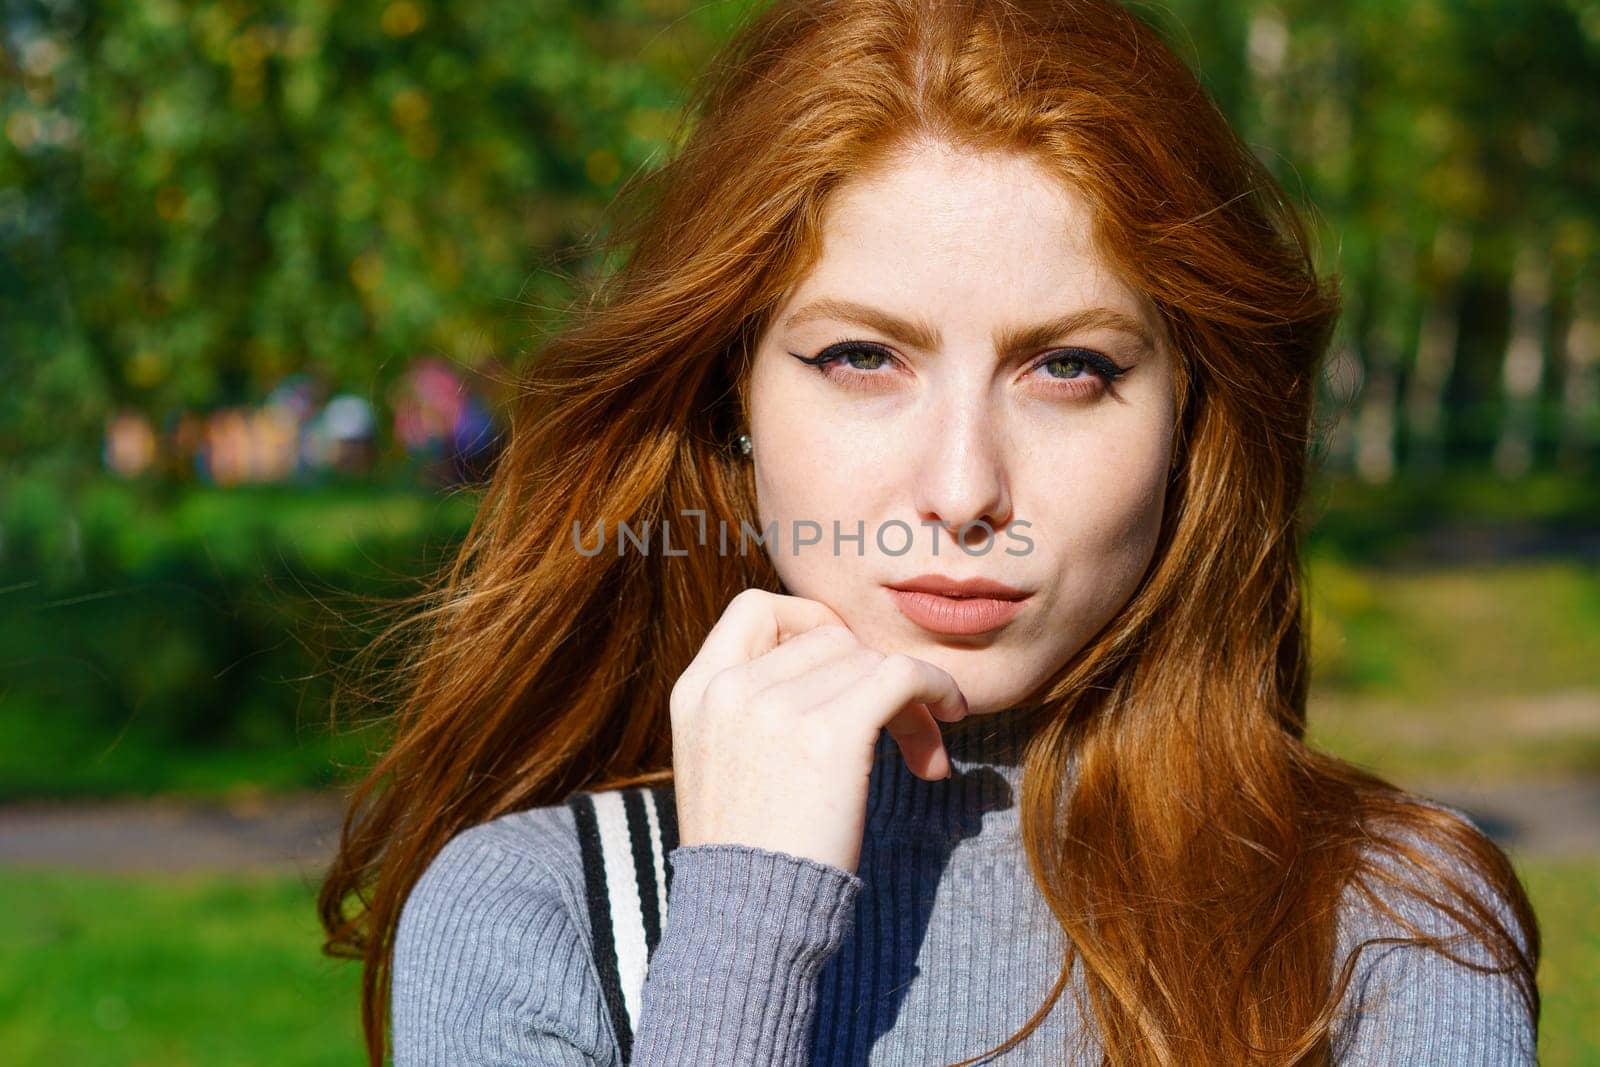 Closeup portrait of a red-haired woman with makeup by EkaterinaPereslavtseva